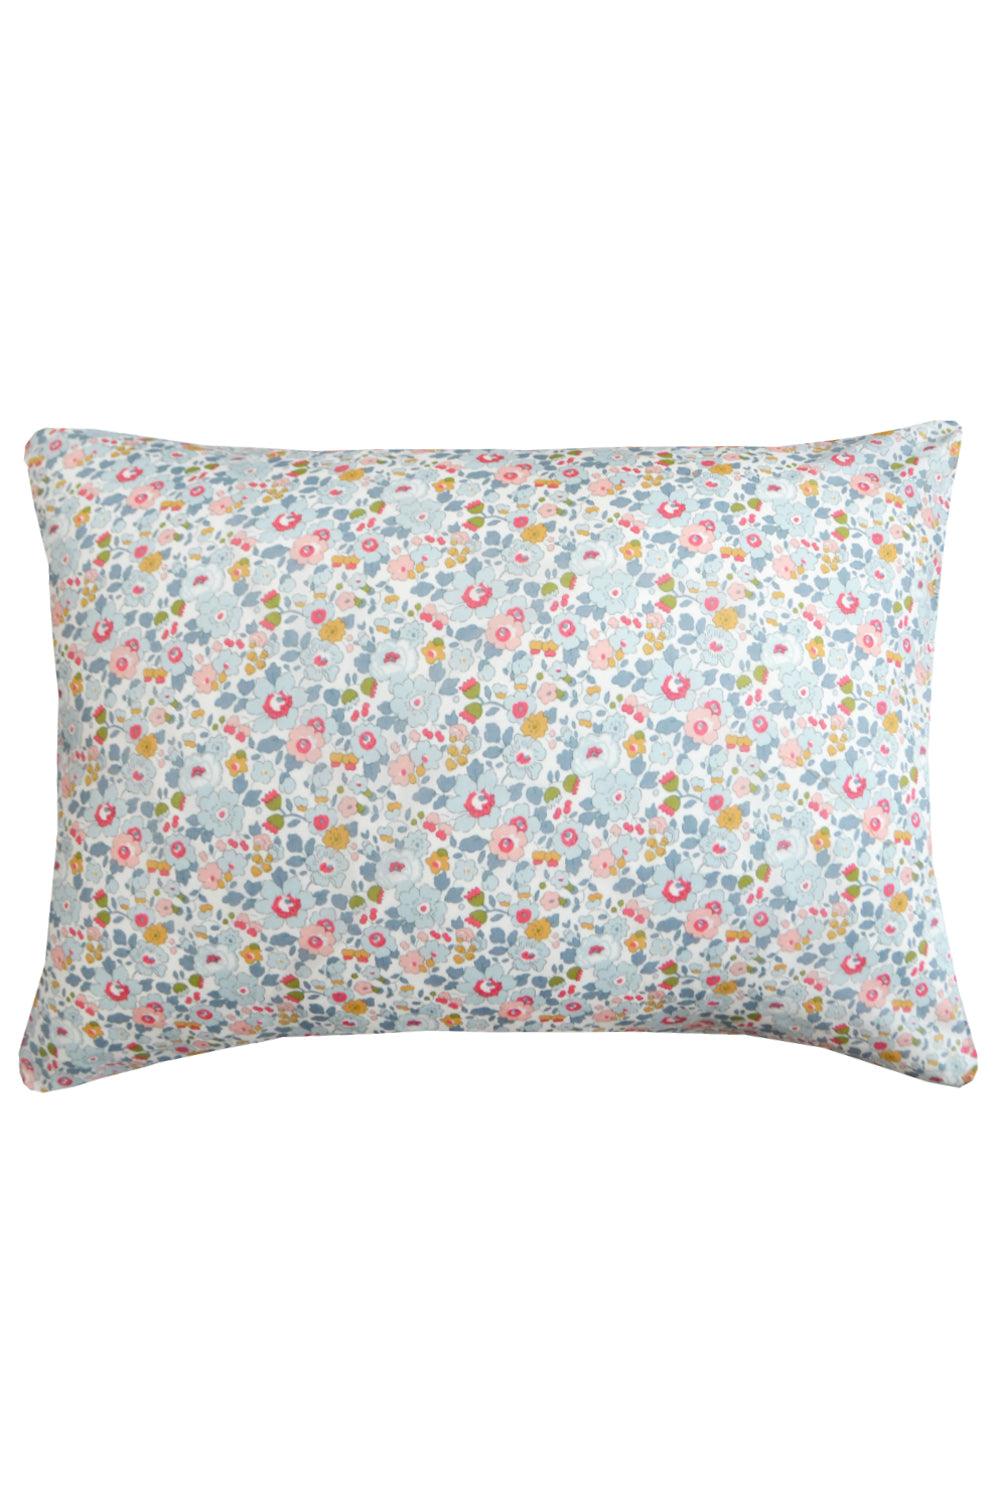 Pillowcase made with Liberty Fabric BETSY GREY - Coco & Wolf